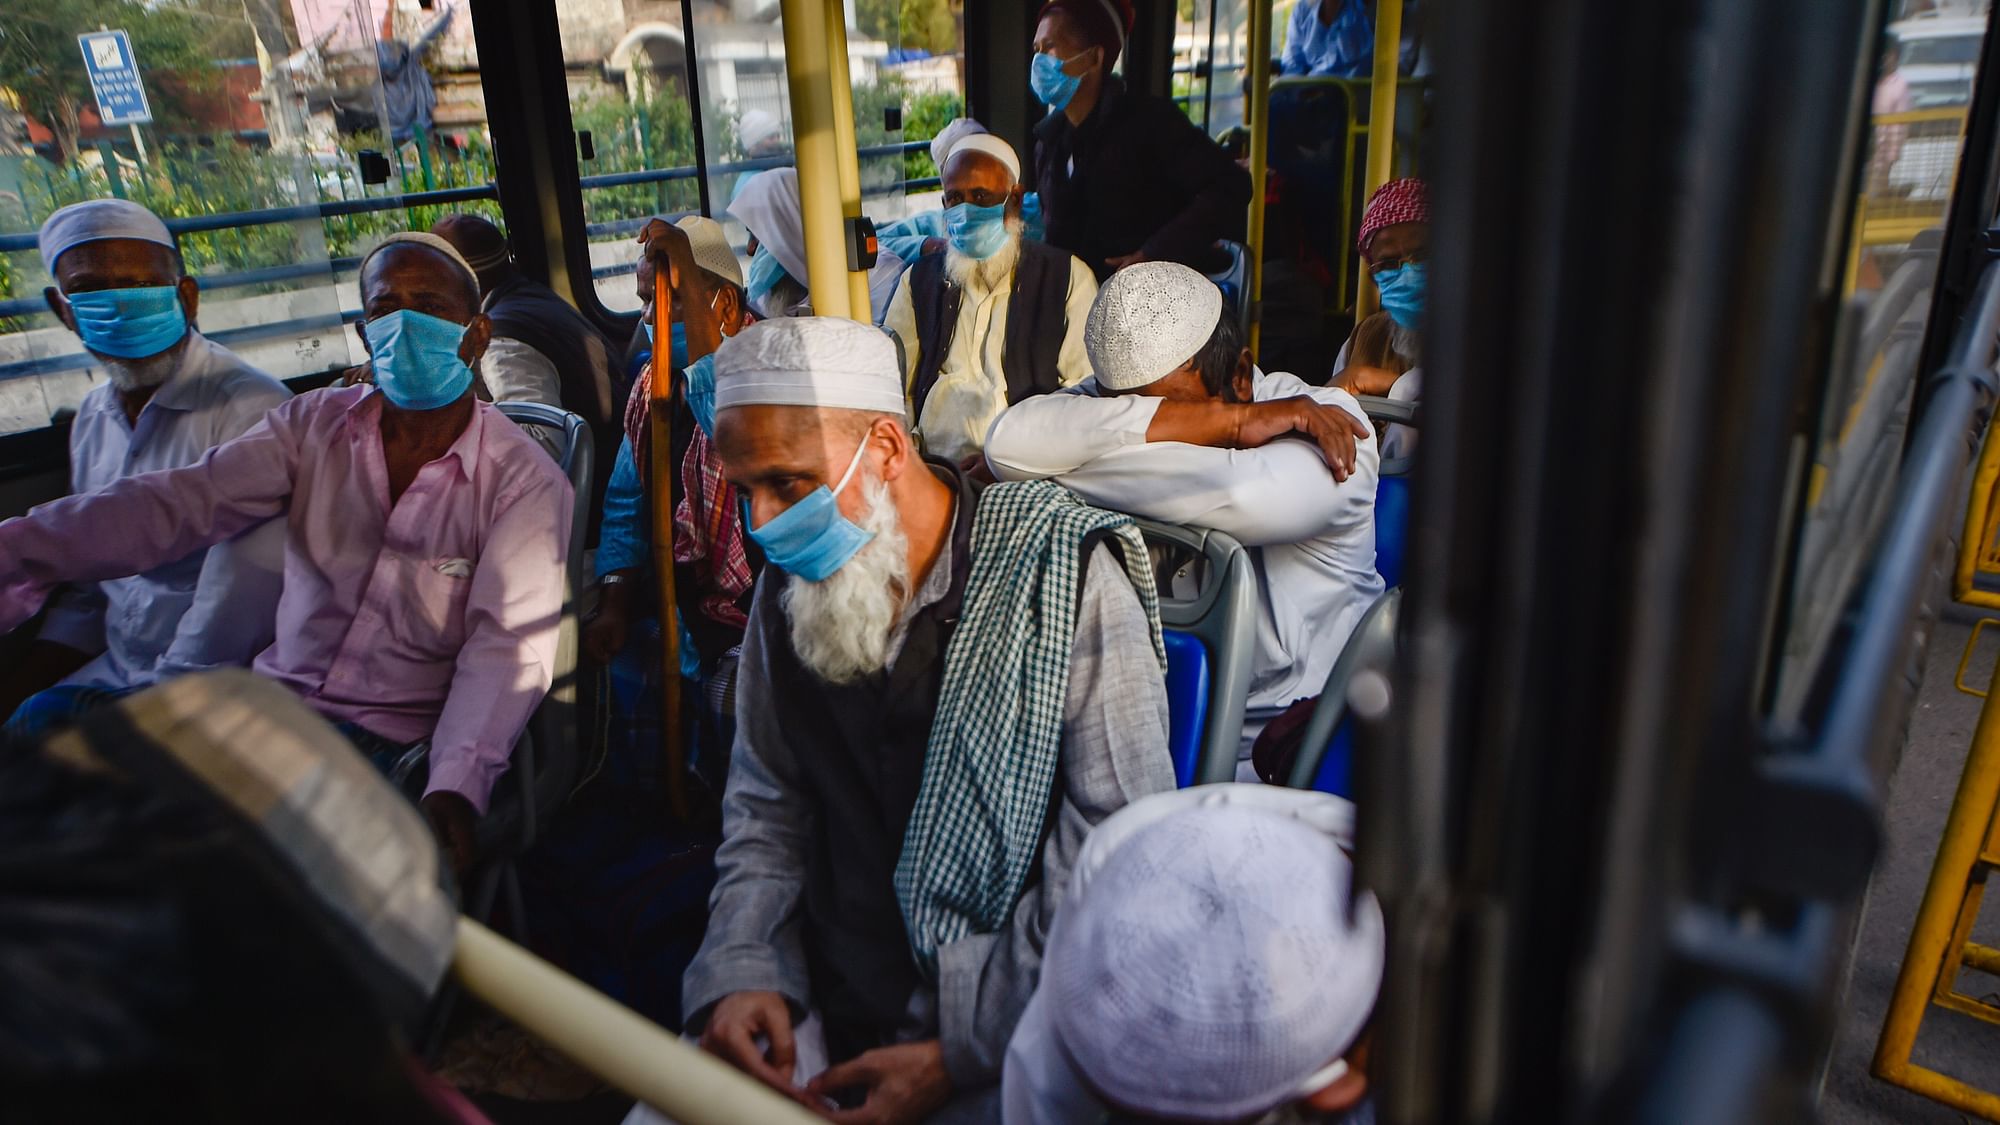 People wearing masks leave for hospital in a bus from Nizamuddin area, after several people showed symptoms of coronavirus following taking part in a religious gathering a few days ago, during the nationwide lockdown, in New Delhi, Monday, 30 March.